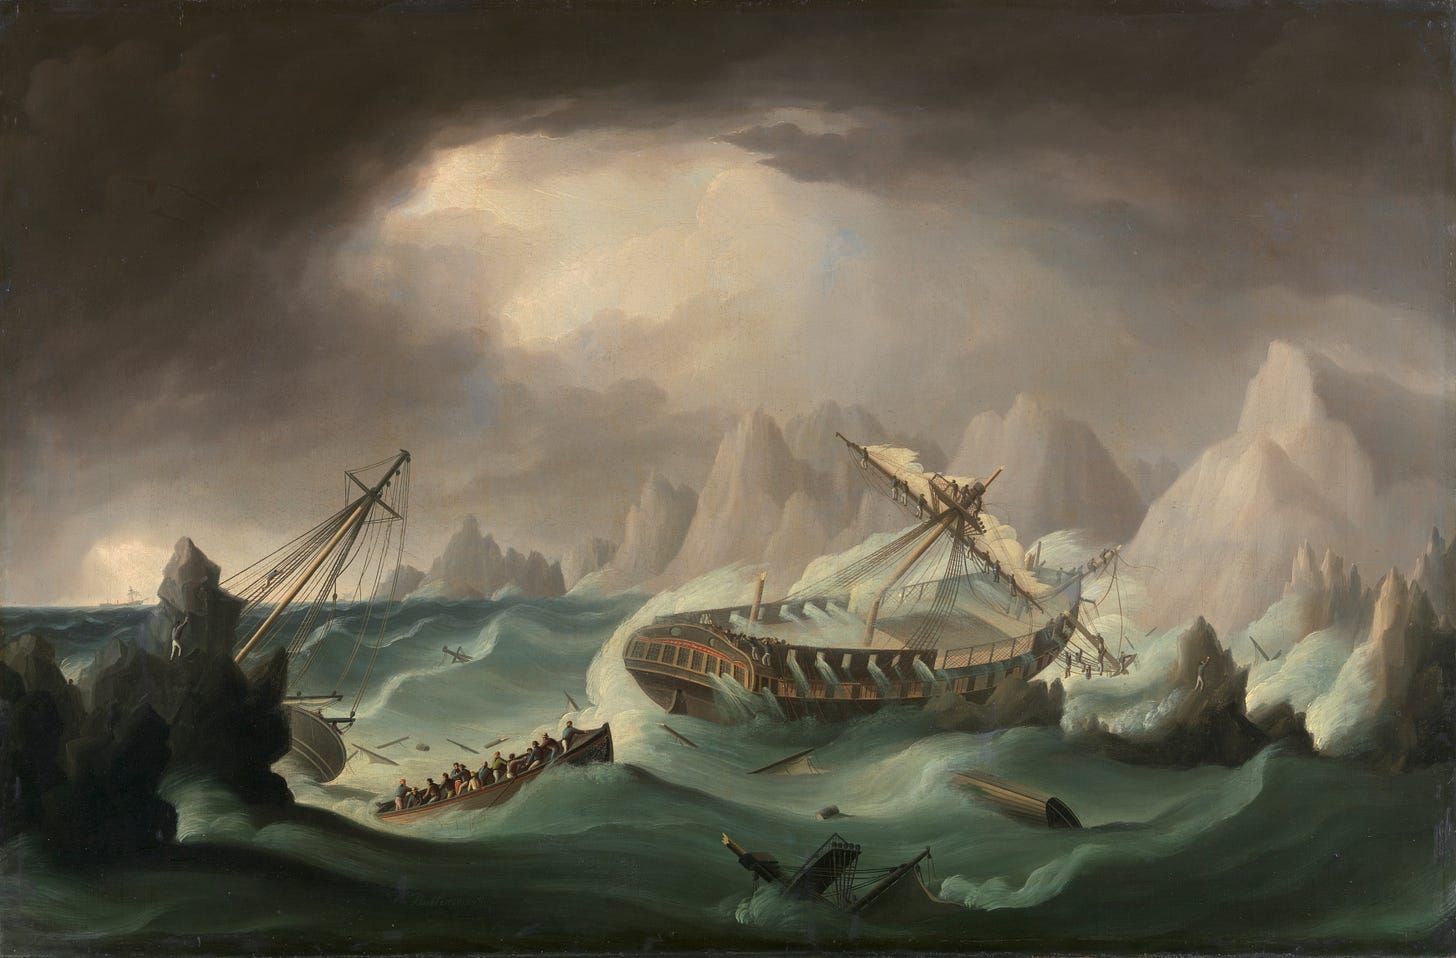 Painting of ship wrecking on rocky coast